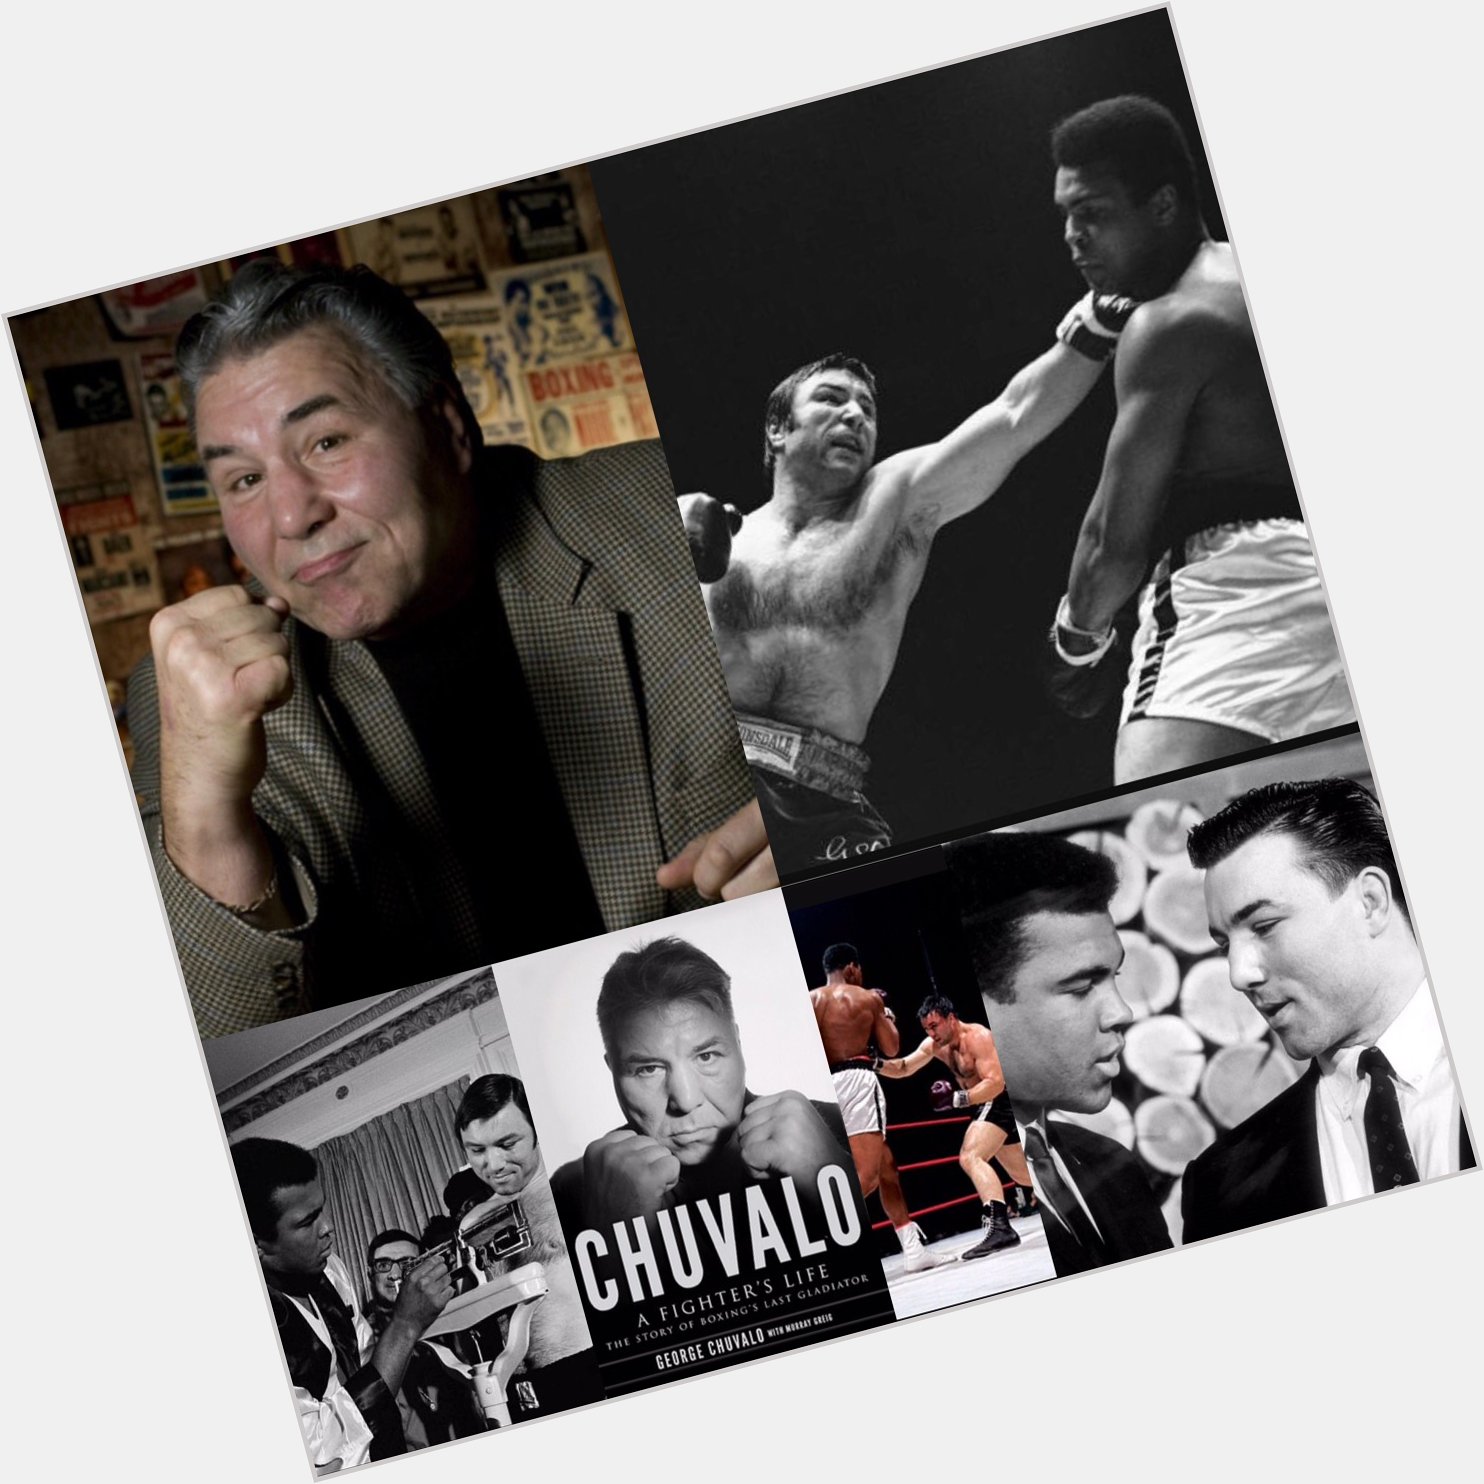 Happy 80th Birthday to one of the most amazing and inspirational people I have ever met, George Chuvalo! 